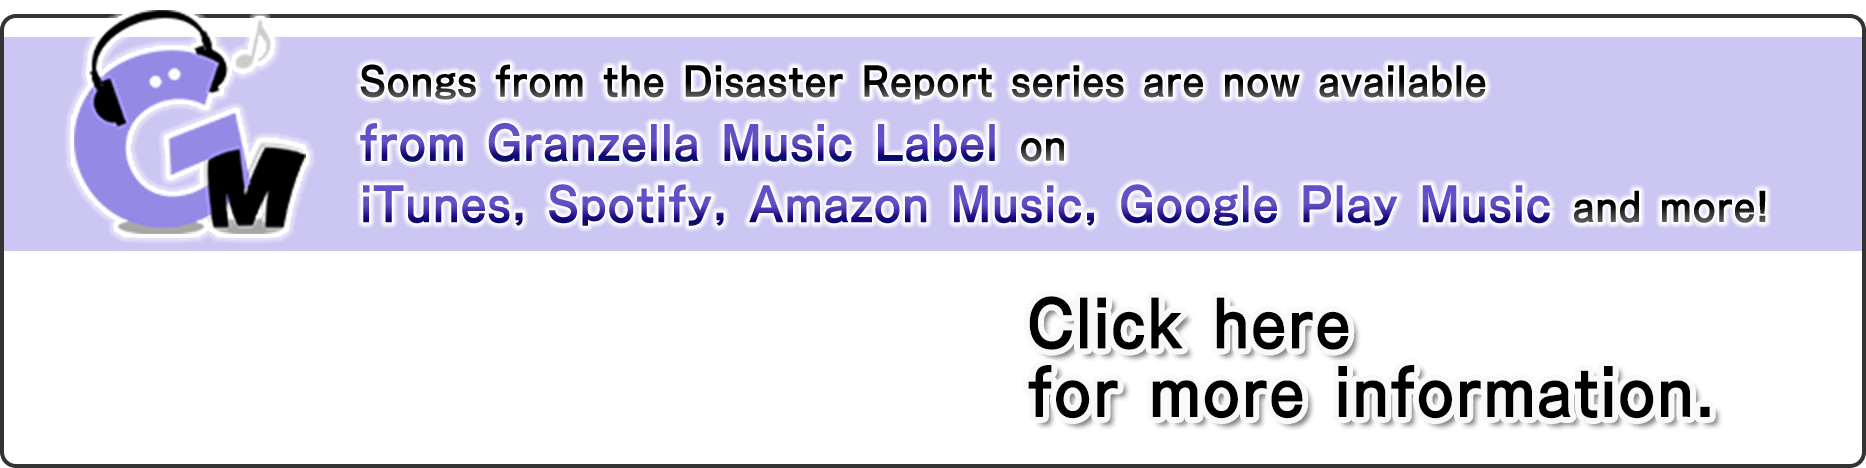 Songs from the Disaster Report series are now available from Granzella Music Label on iTunes, Spotify, GooglePlay Music and more!